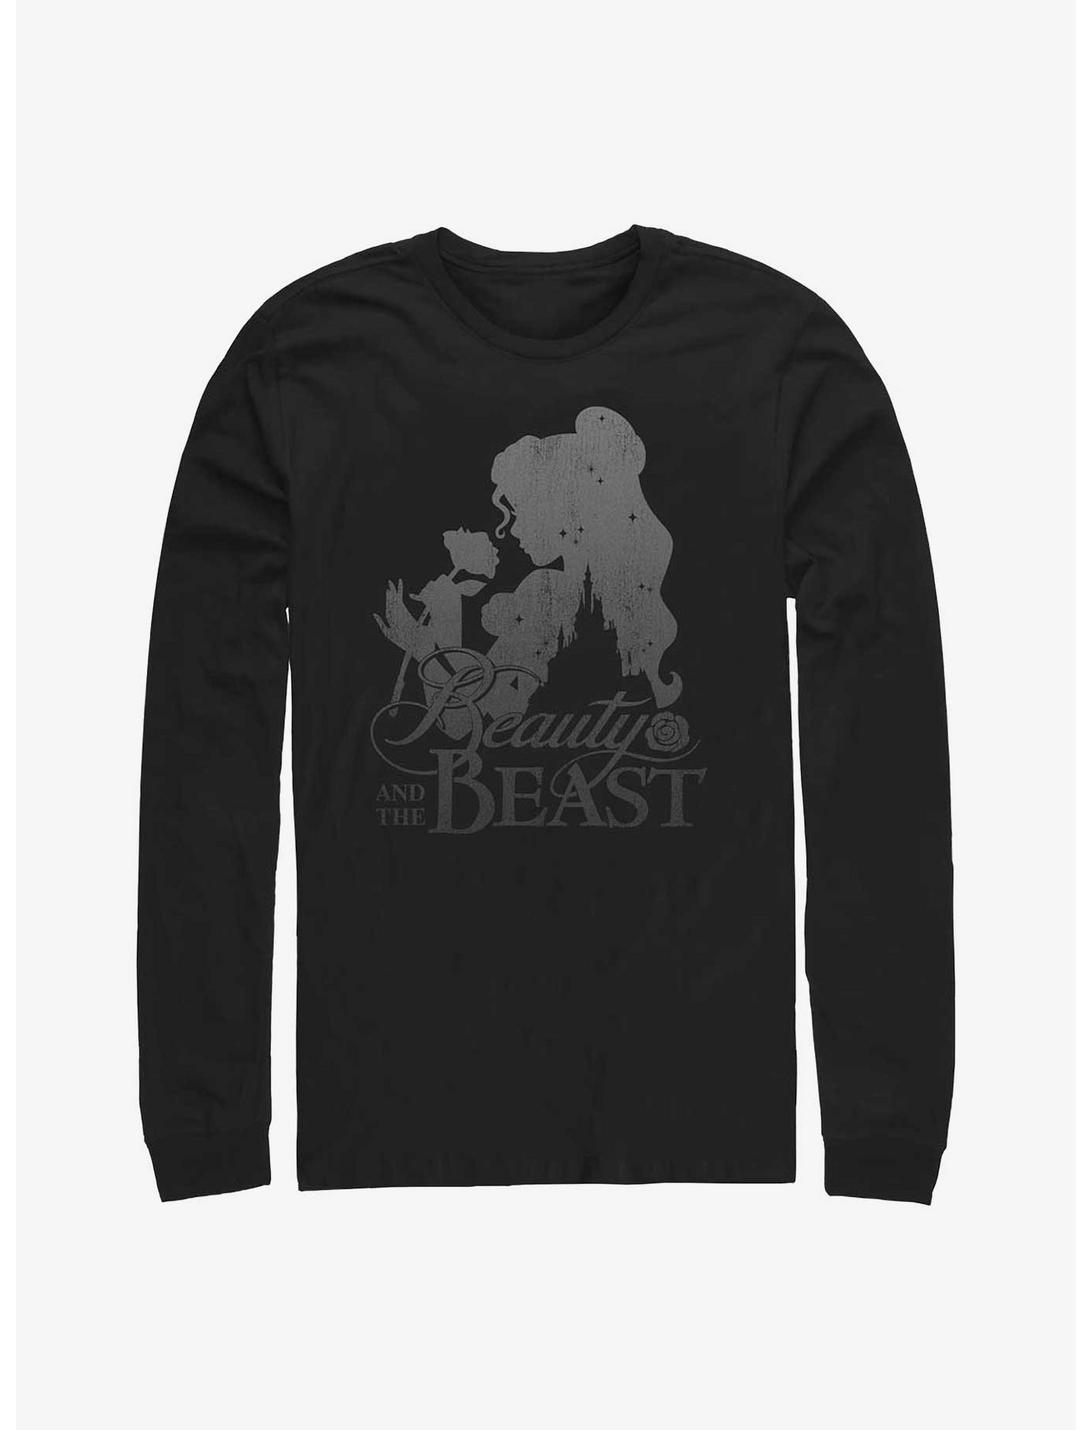 Disney Beauty And The Beast Silhouette Long-Sleeve T-Shirt, BLACK, hi-res